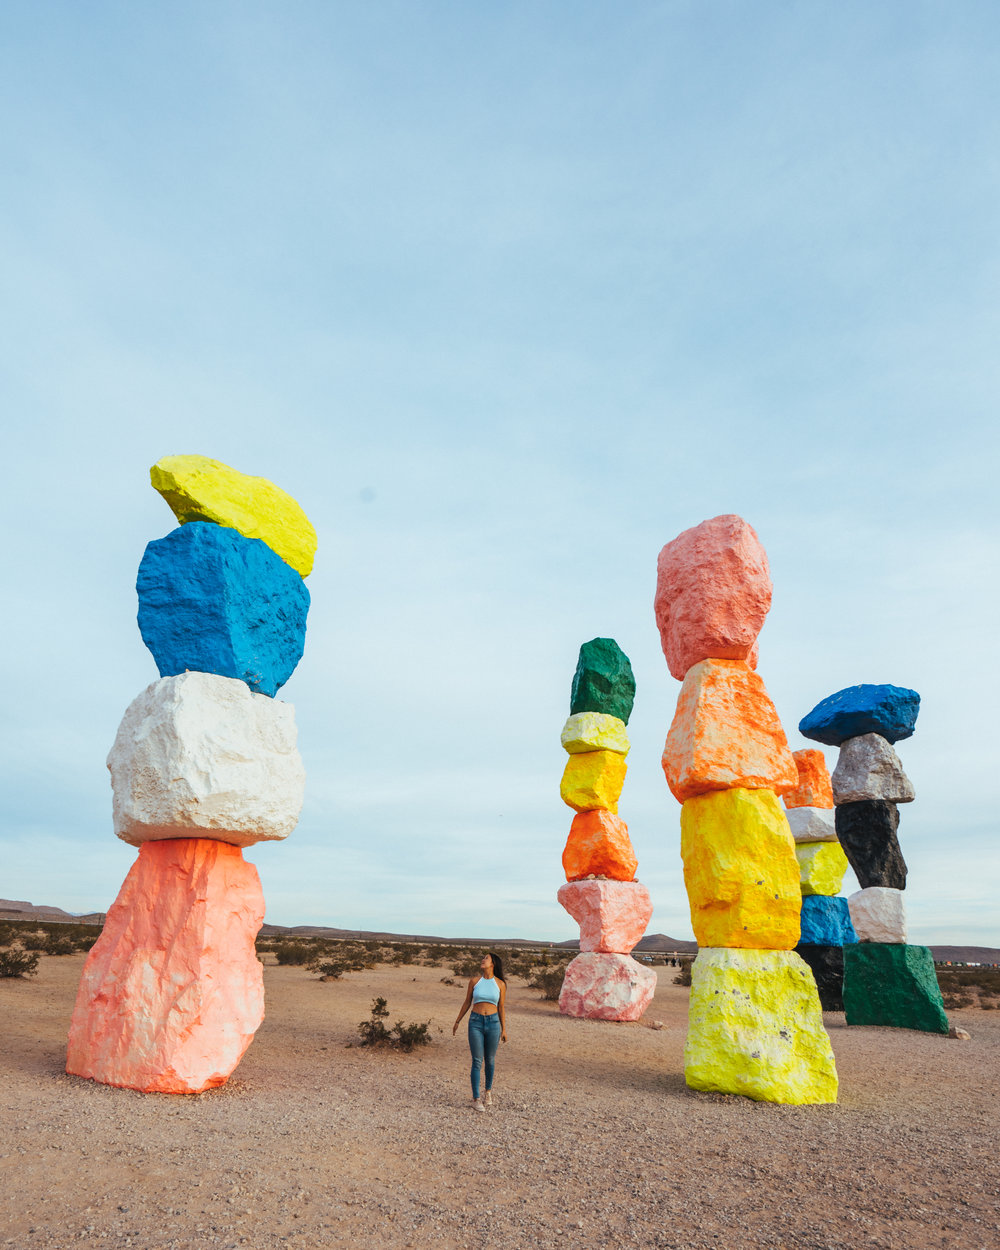 Visit places like the Seven Magic Mountains with an RV!